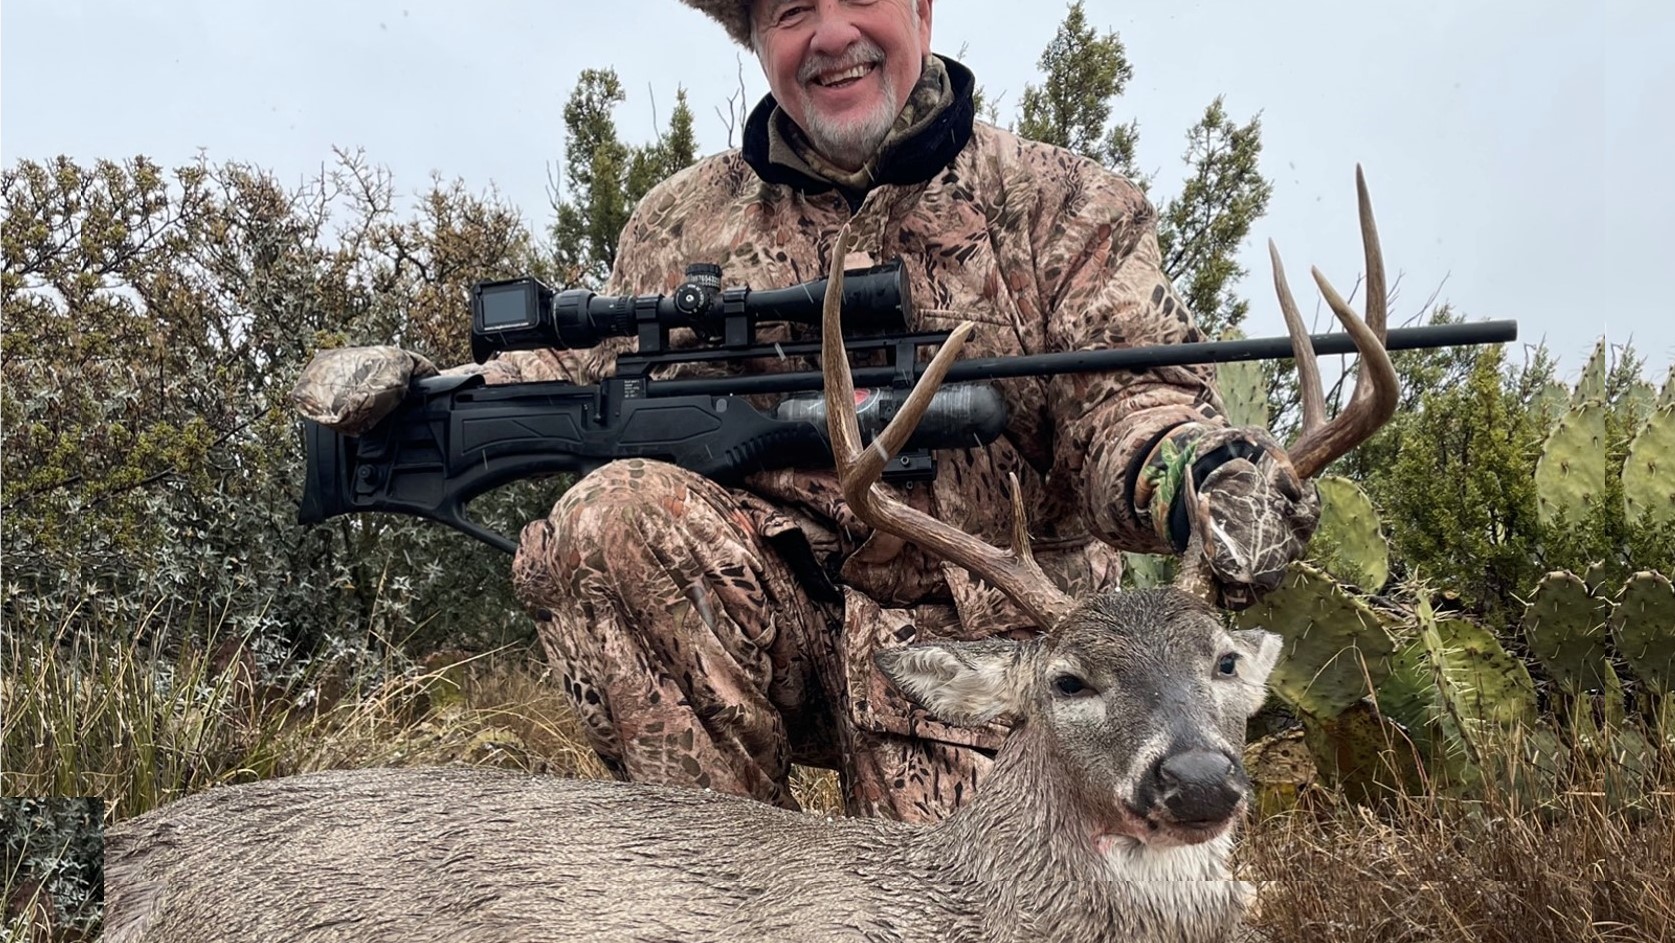 Can Air Rifles Kill Big Game Animals Effectively? Outdoor Life